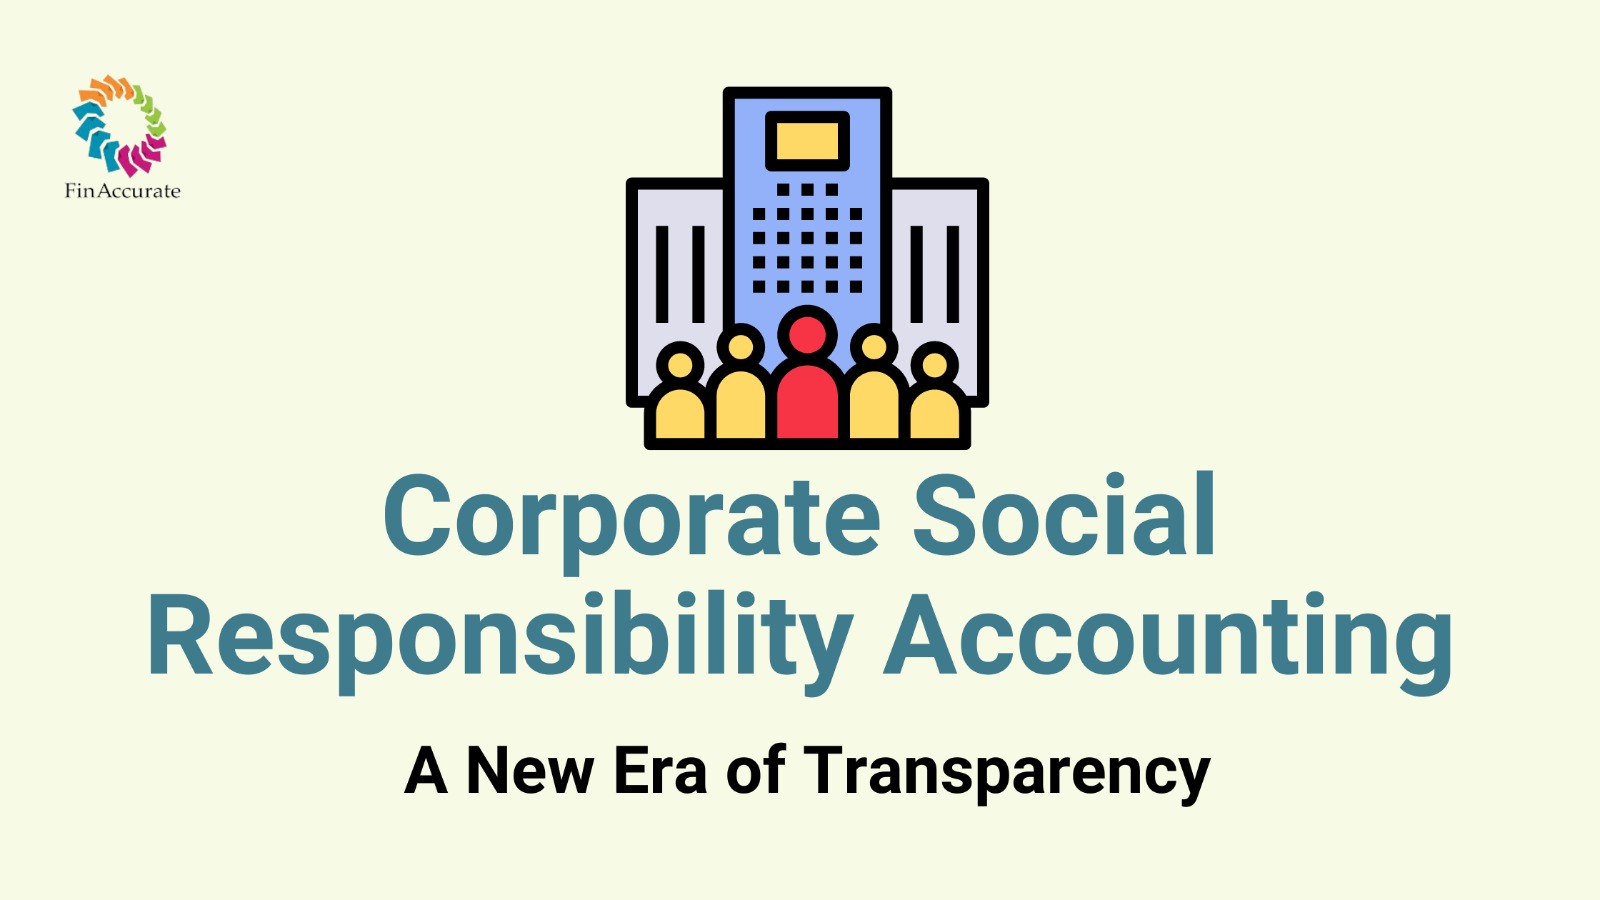 Corporate Social Responsibility Accounting: A New Era of Transparency